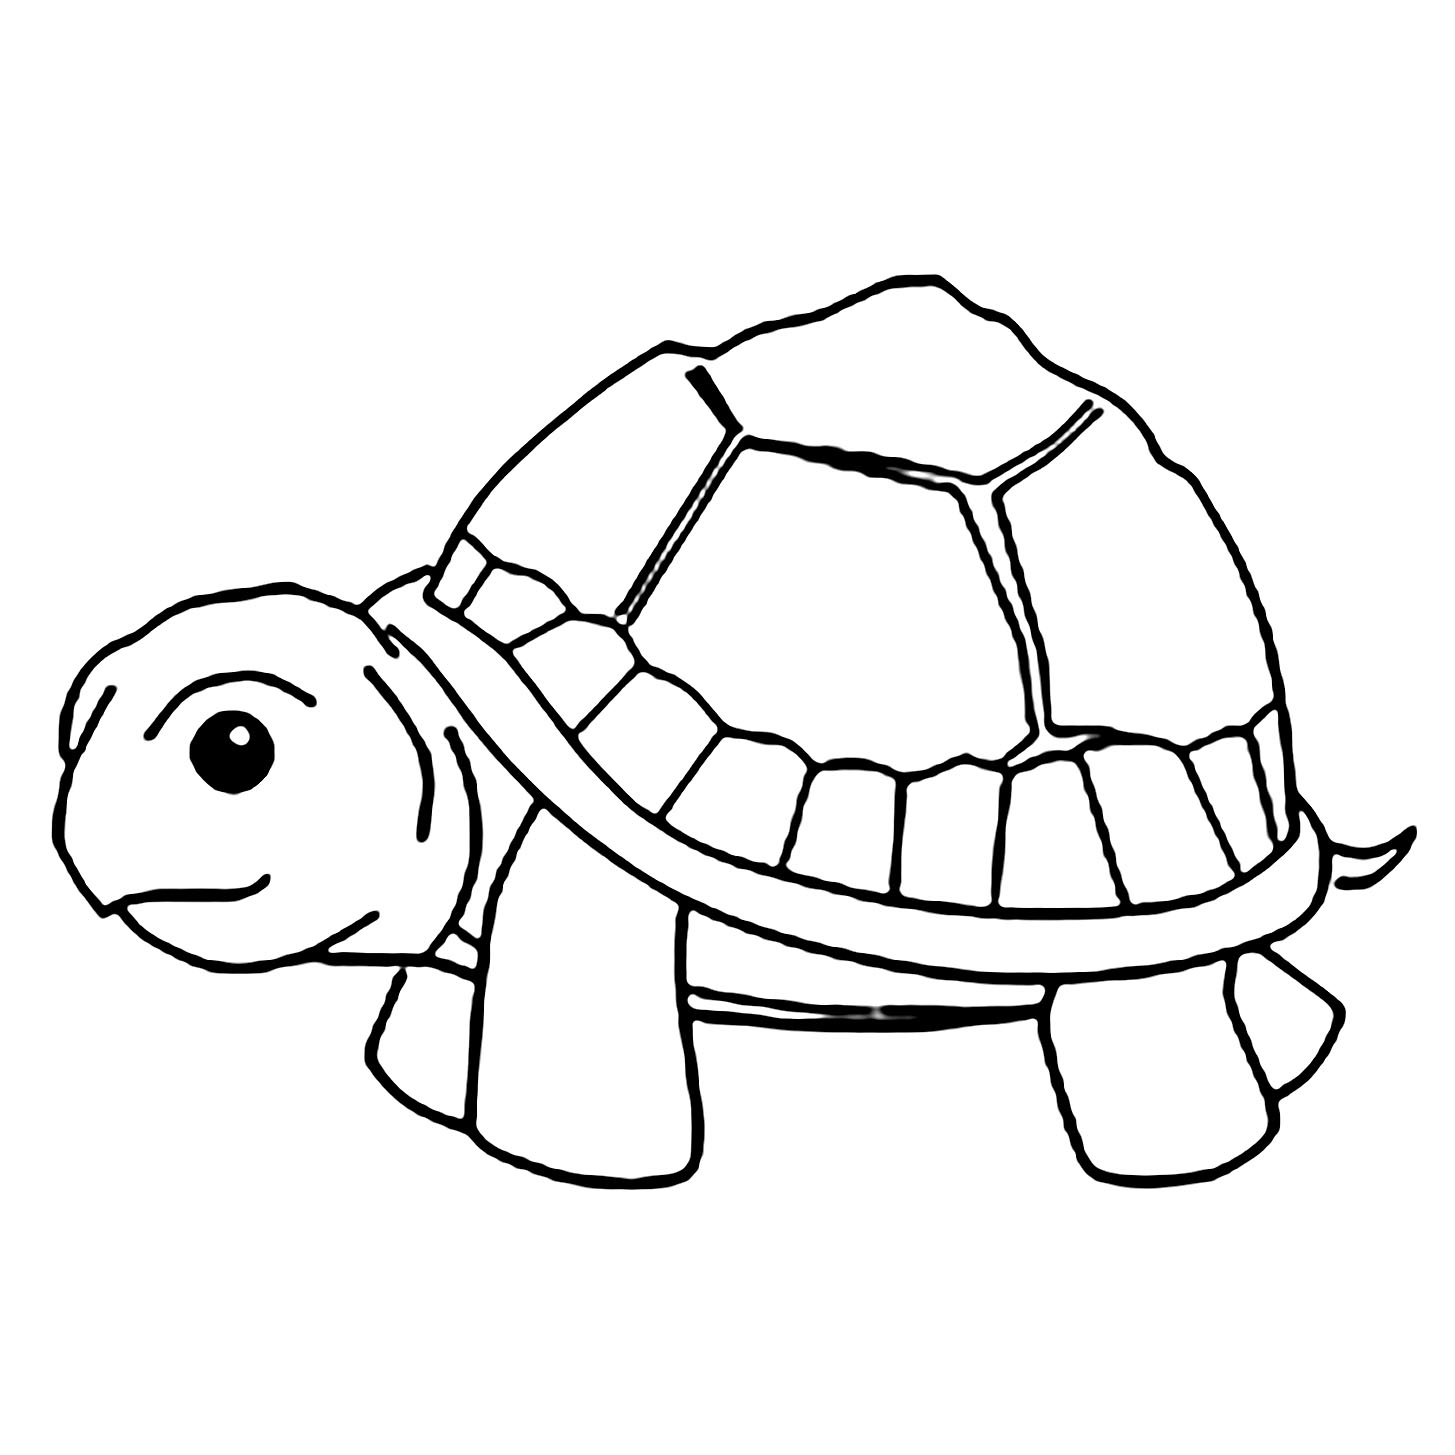 Turtle coloring for kids Turtles Kids Coloring Pages